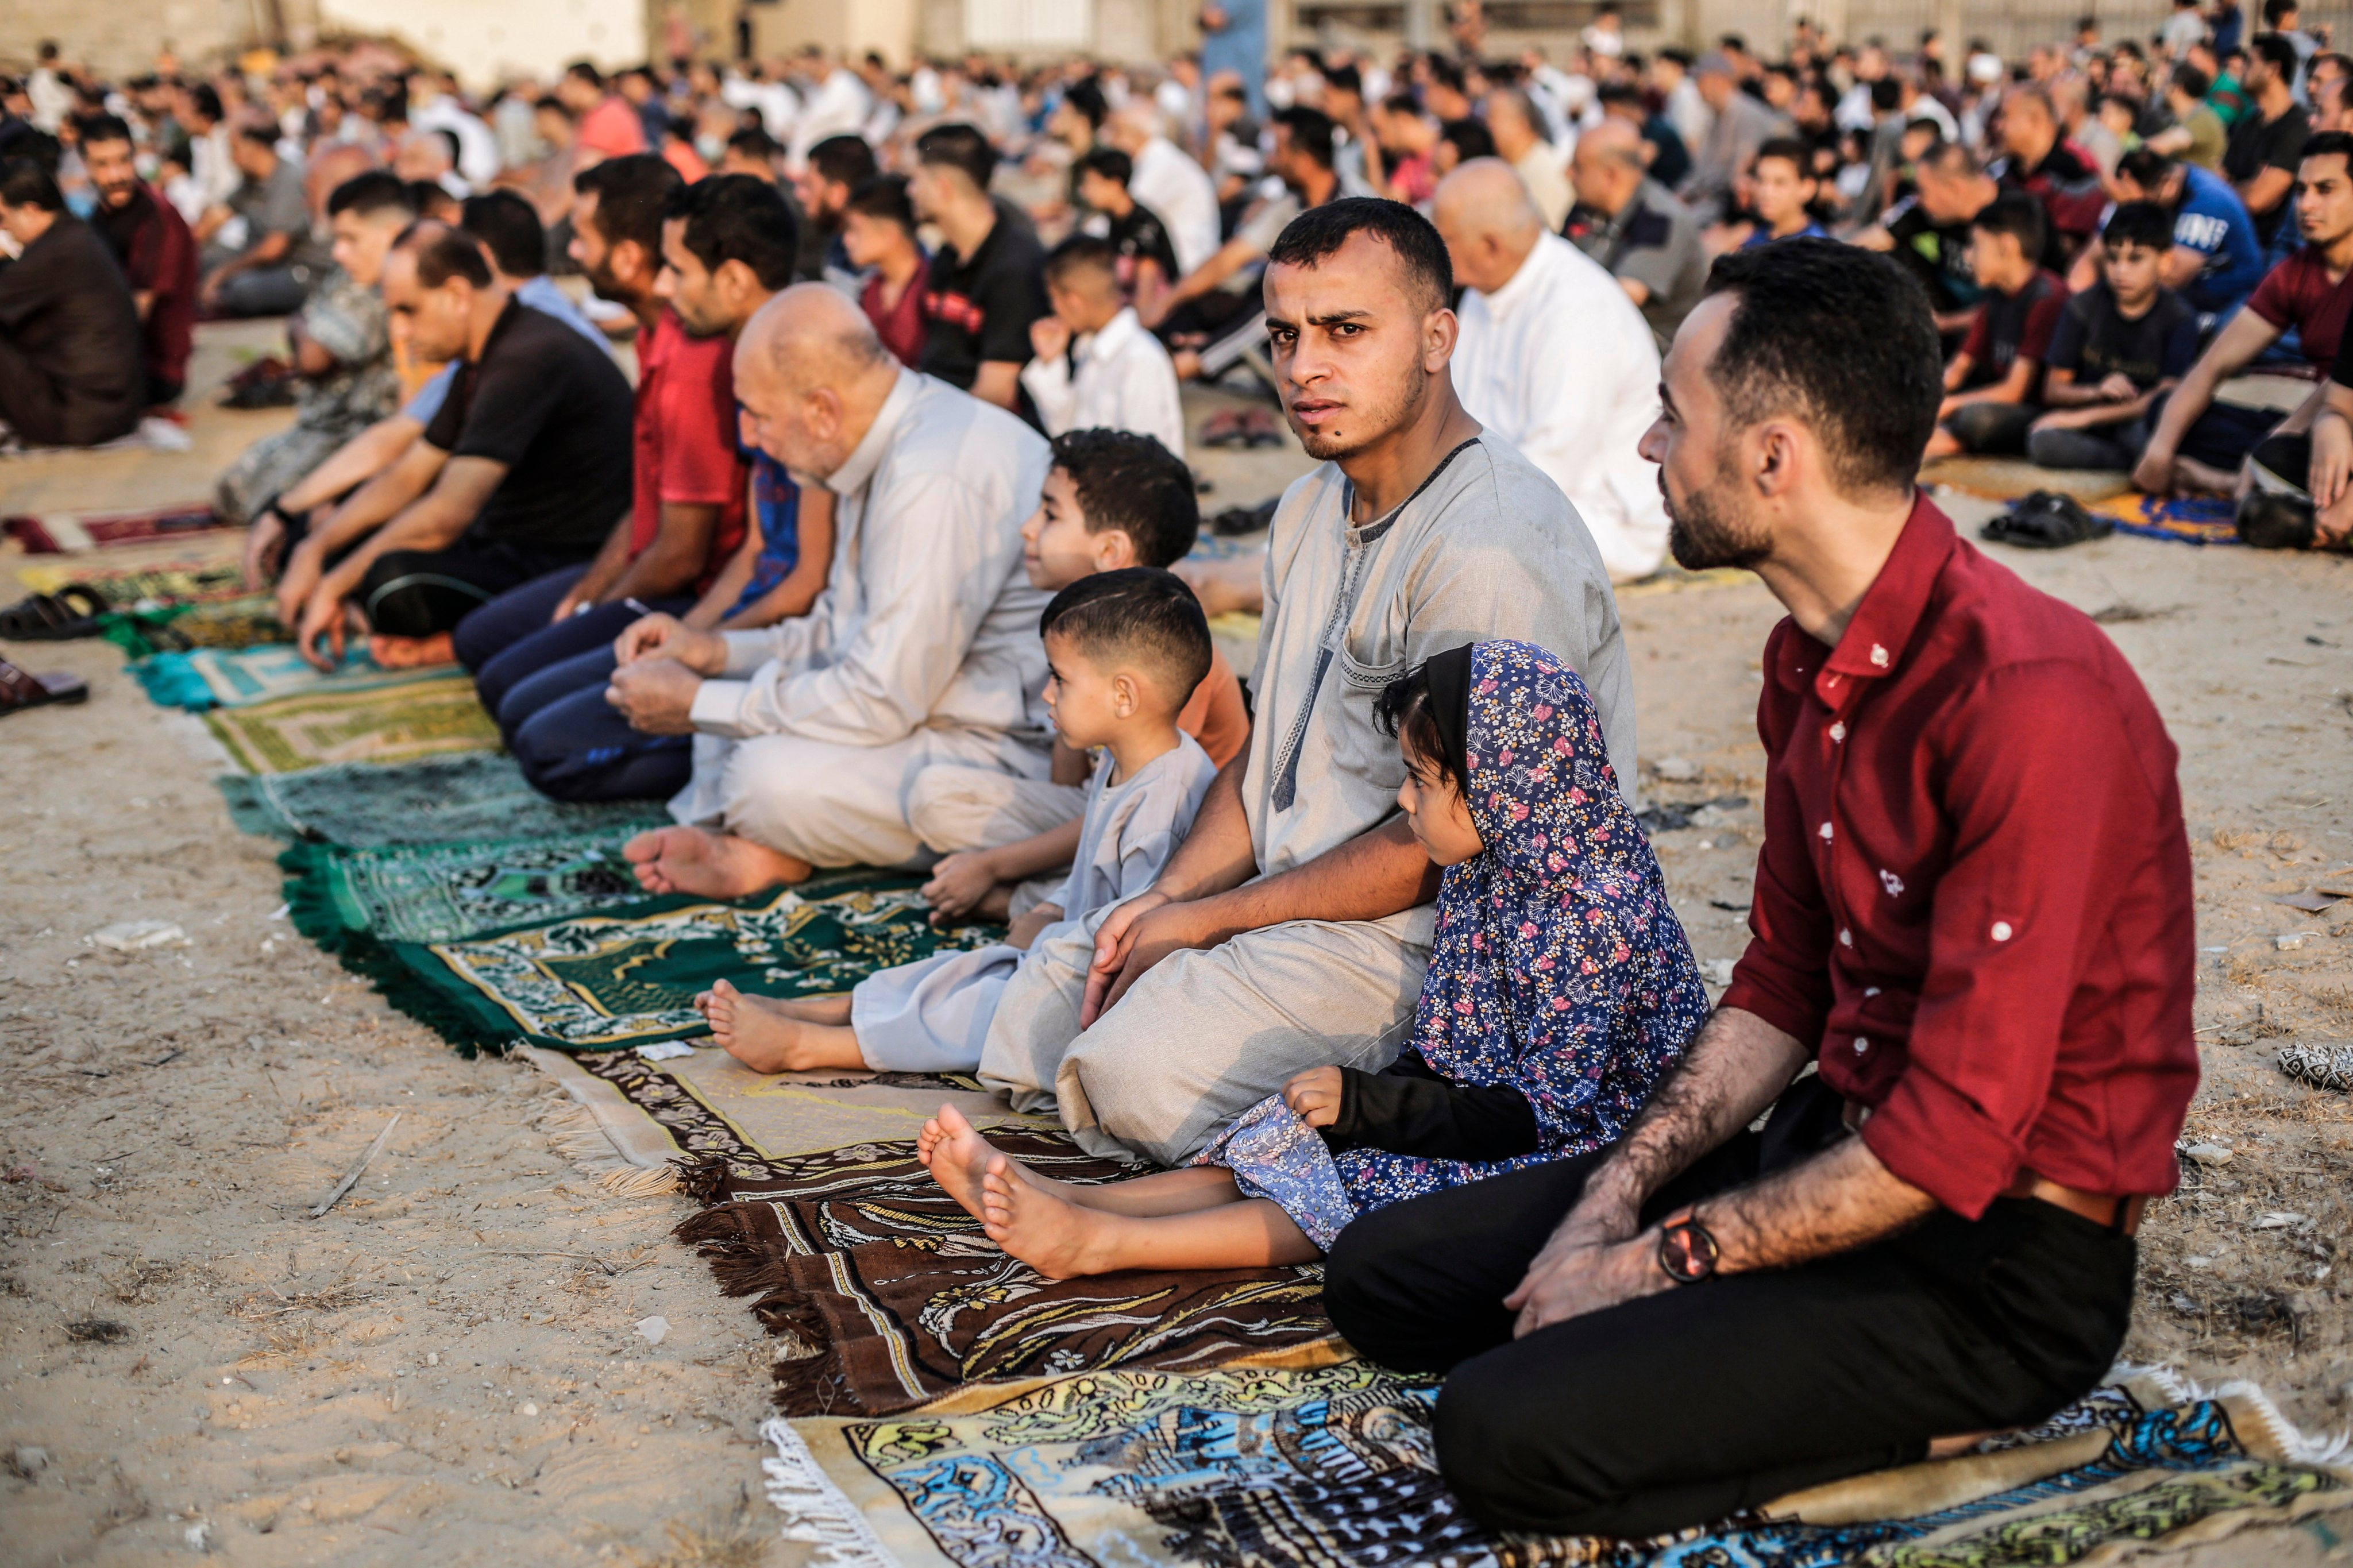 Palestinian Muslims perform prayers in a square, on the